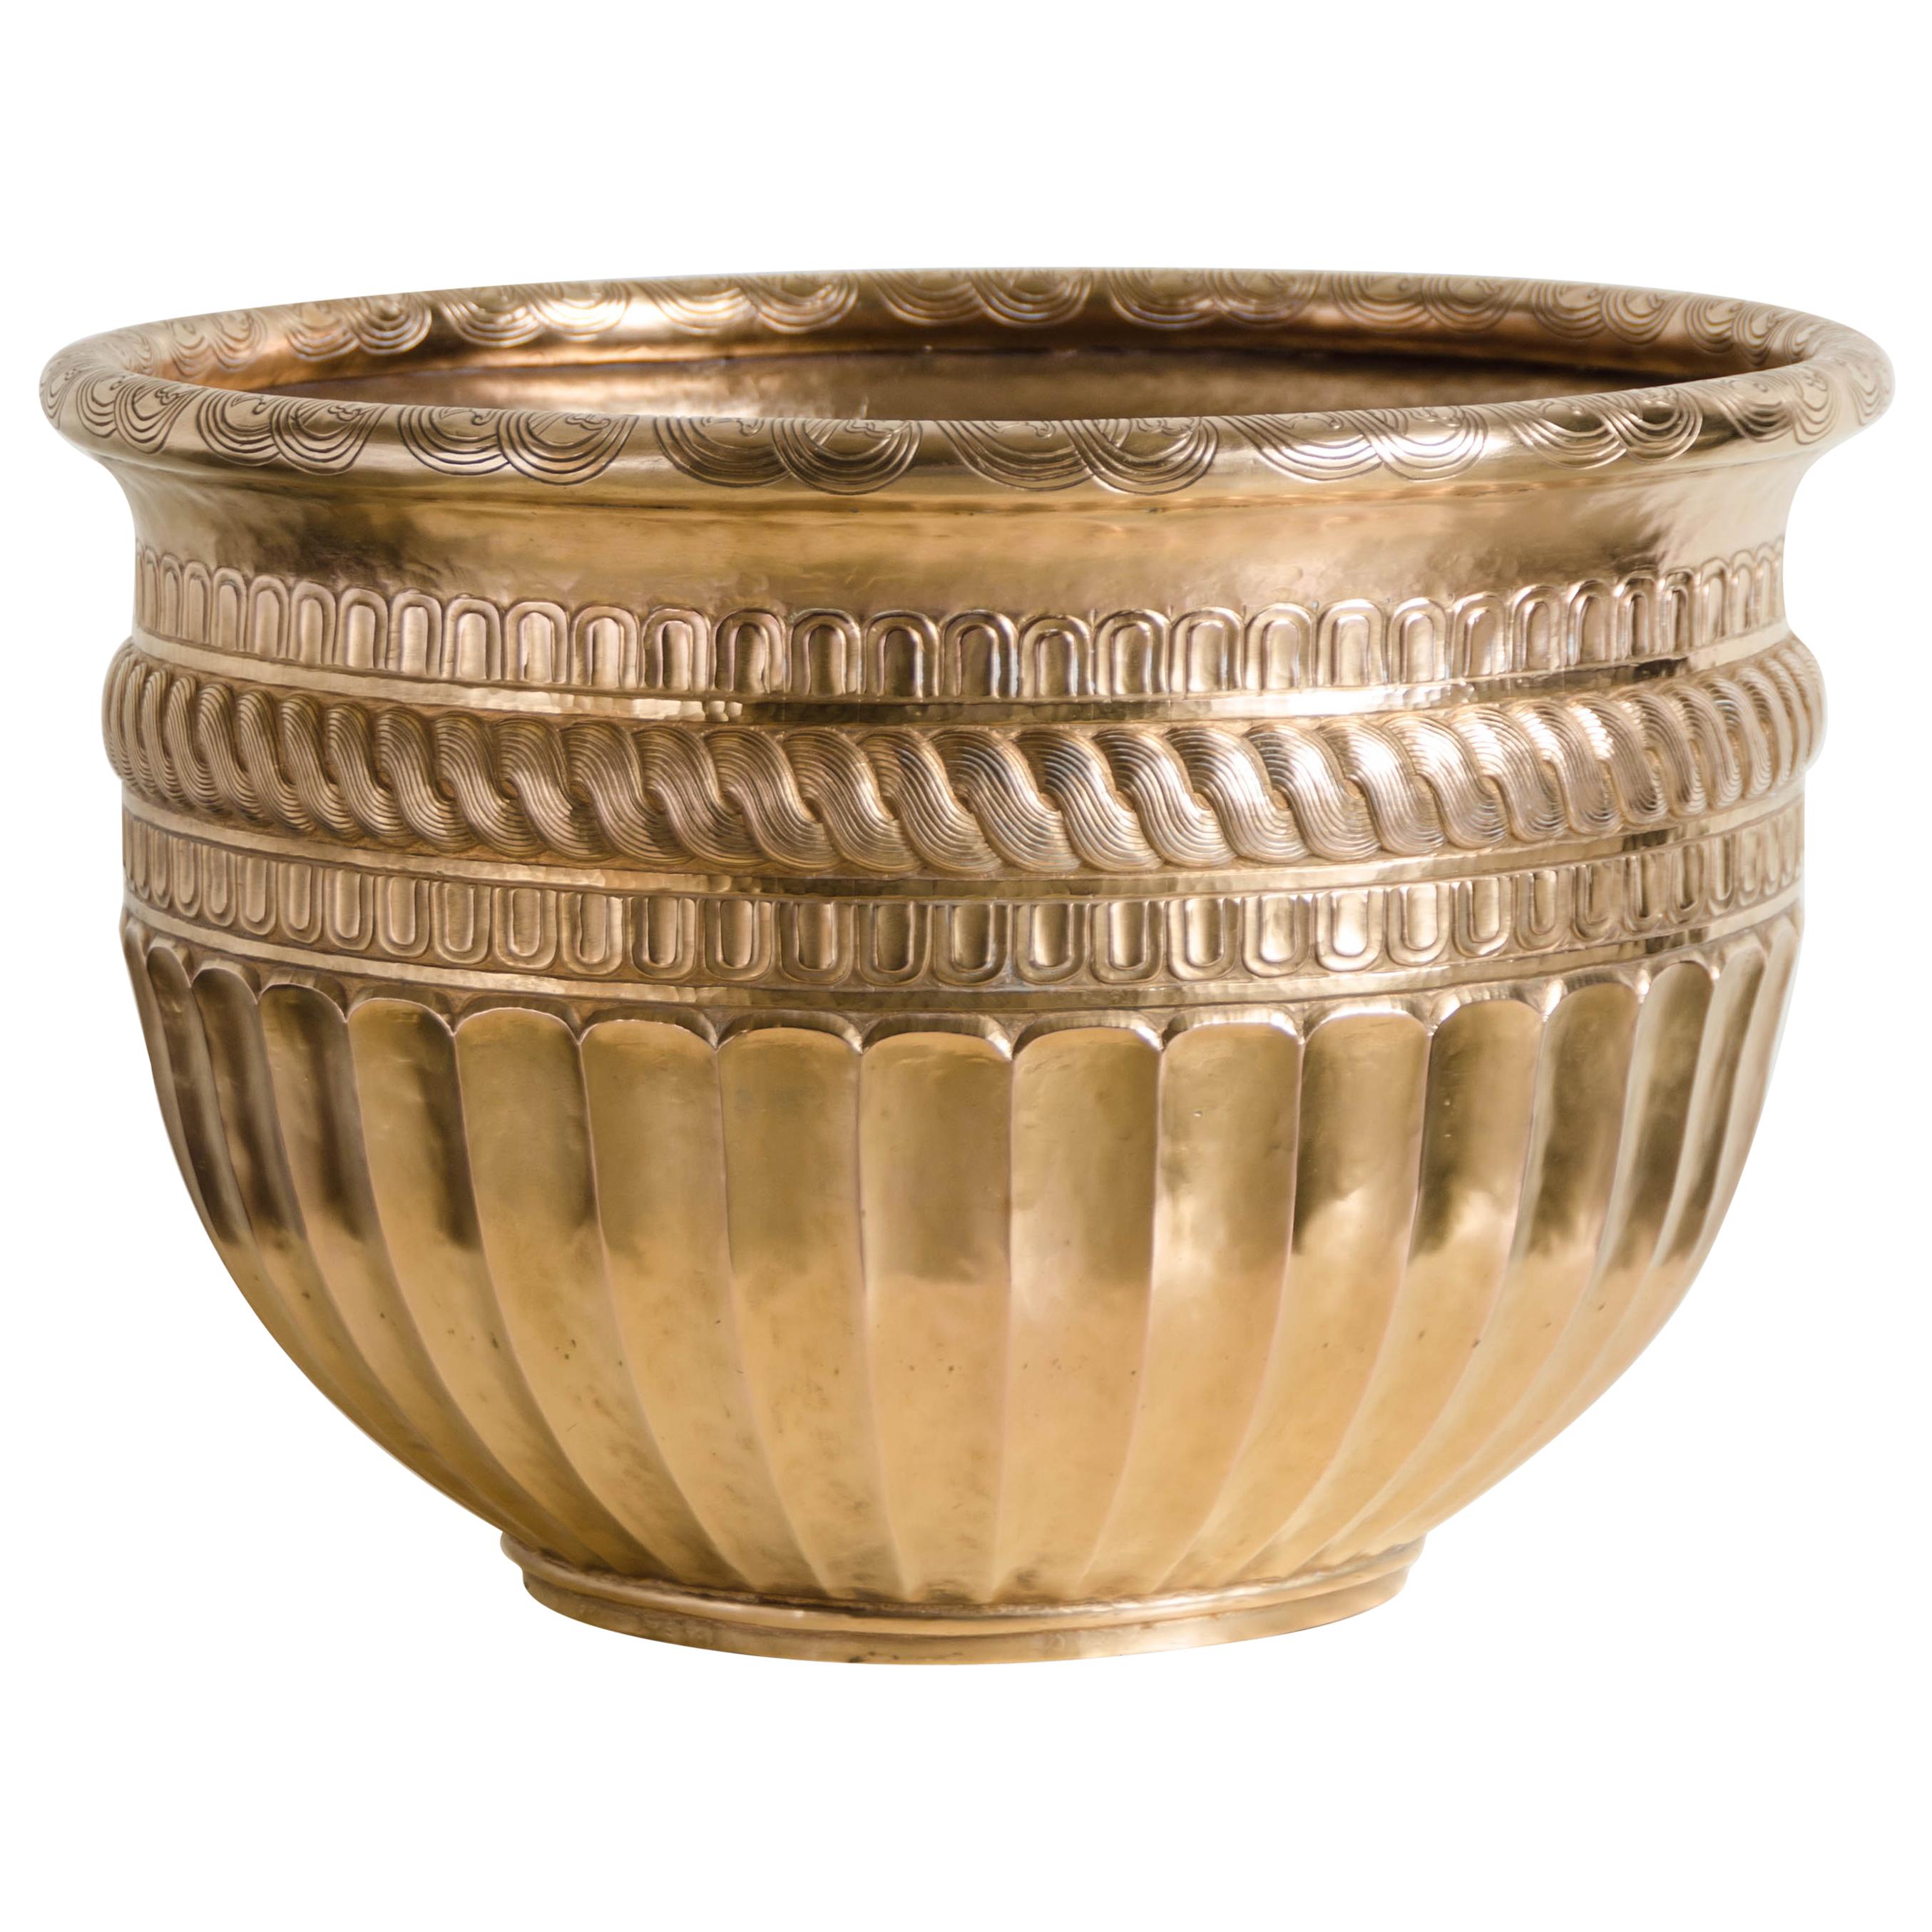 Gold Tang Design Pot, 24-Karat Gold Plate by Robert Kuo, Hand Repousse, Limited For Sale